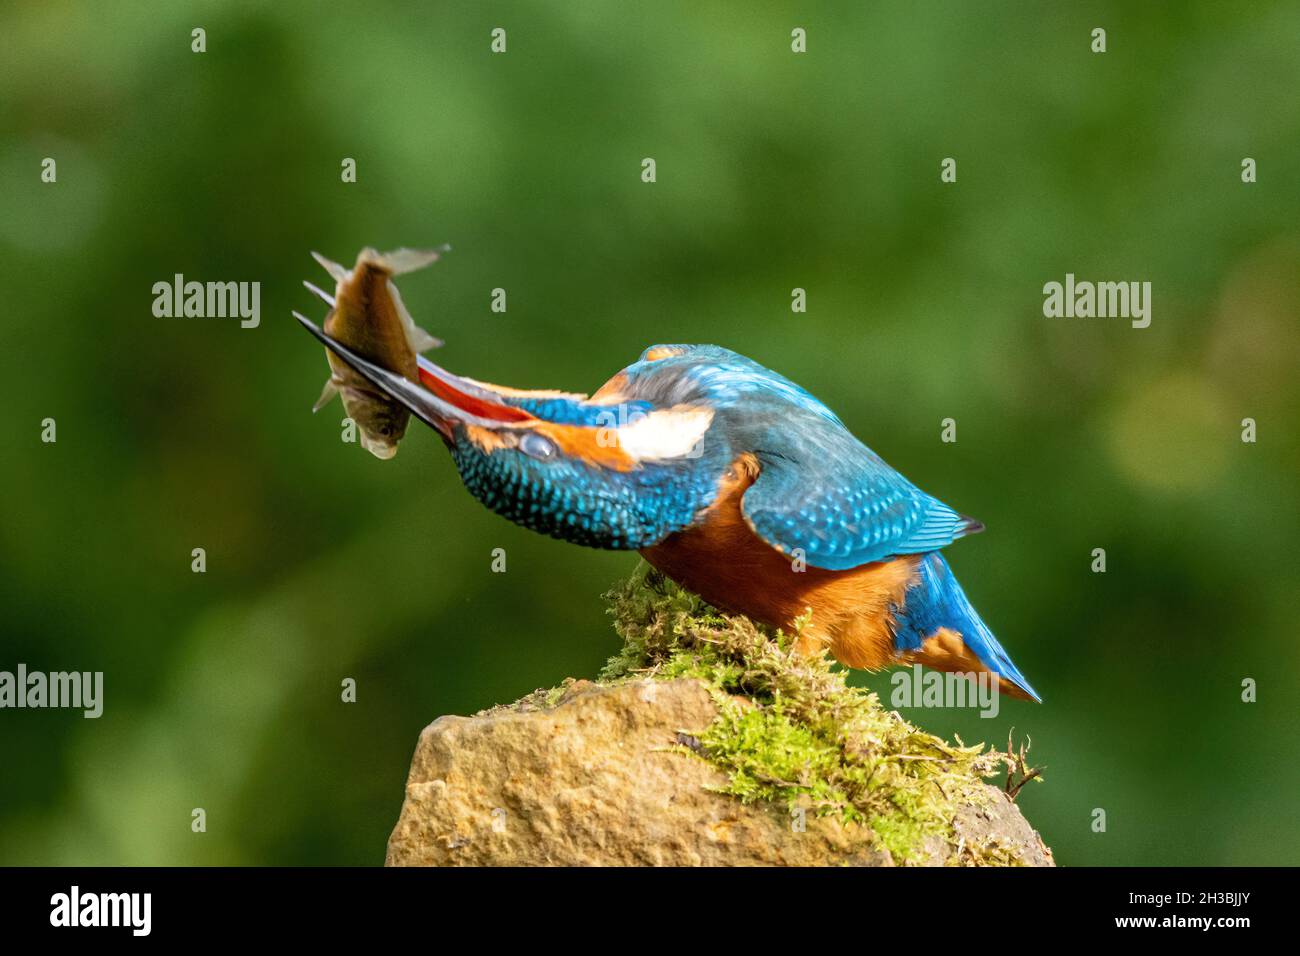 Kingfisher (Alcedo atthis) killing a fish it has caught by shaking and striking it against a perch, with eyes protected by nictitating membrane, UK Stock Photo